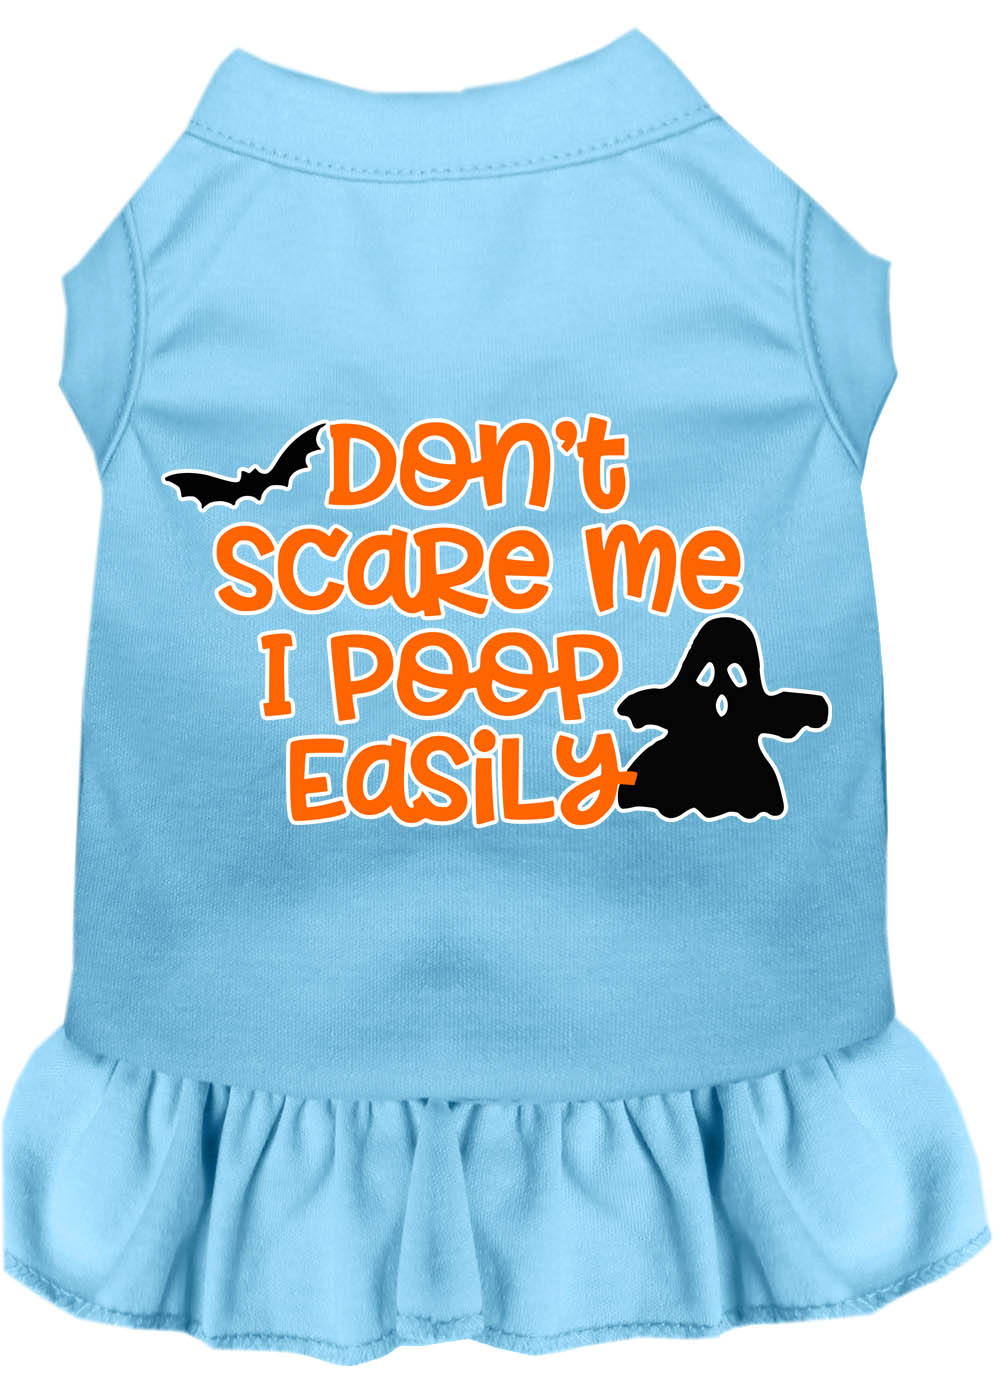 Don't Scare Me, Poops Easily Screen Print Dog Dress Baby Blue Med